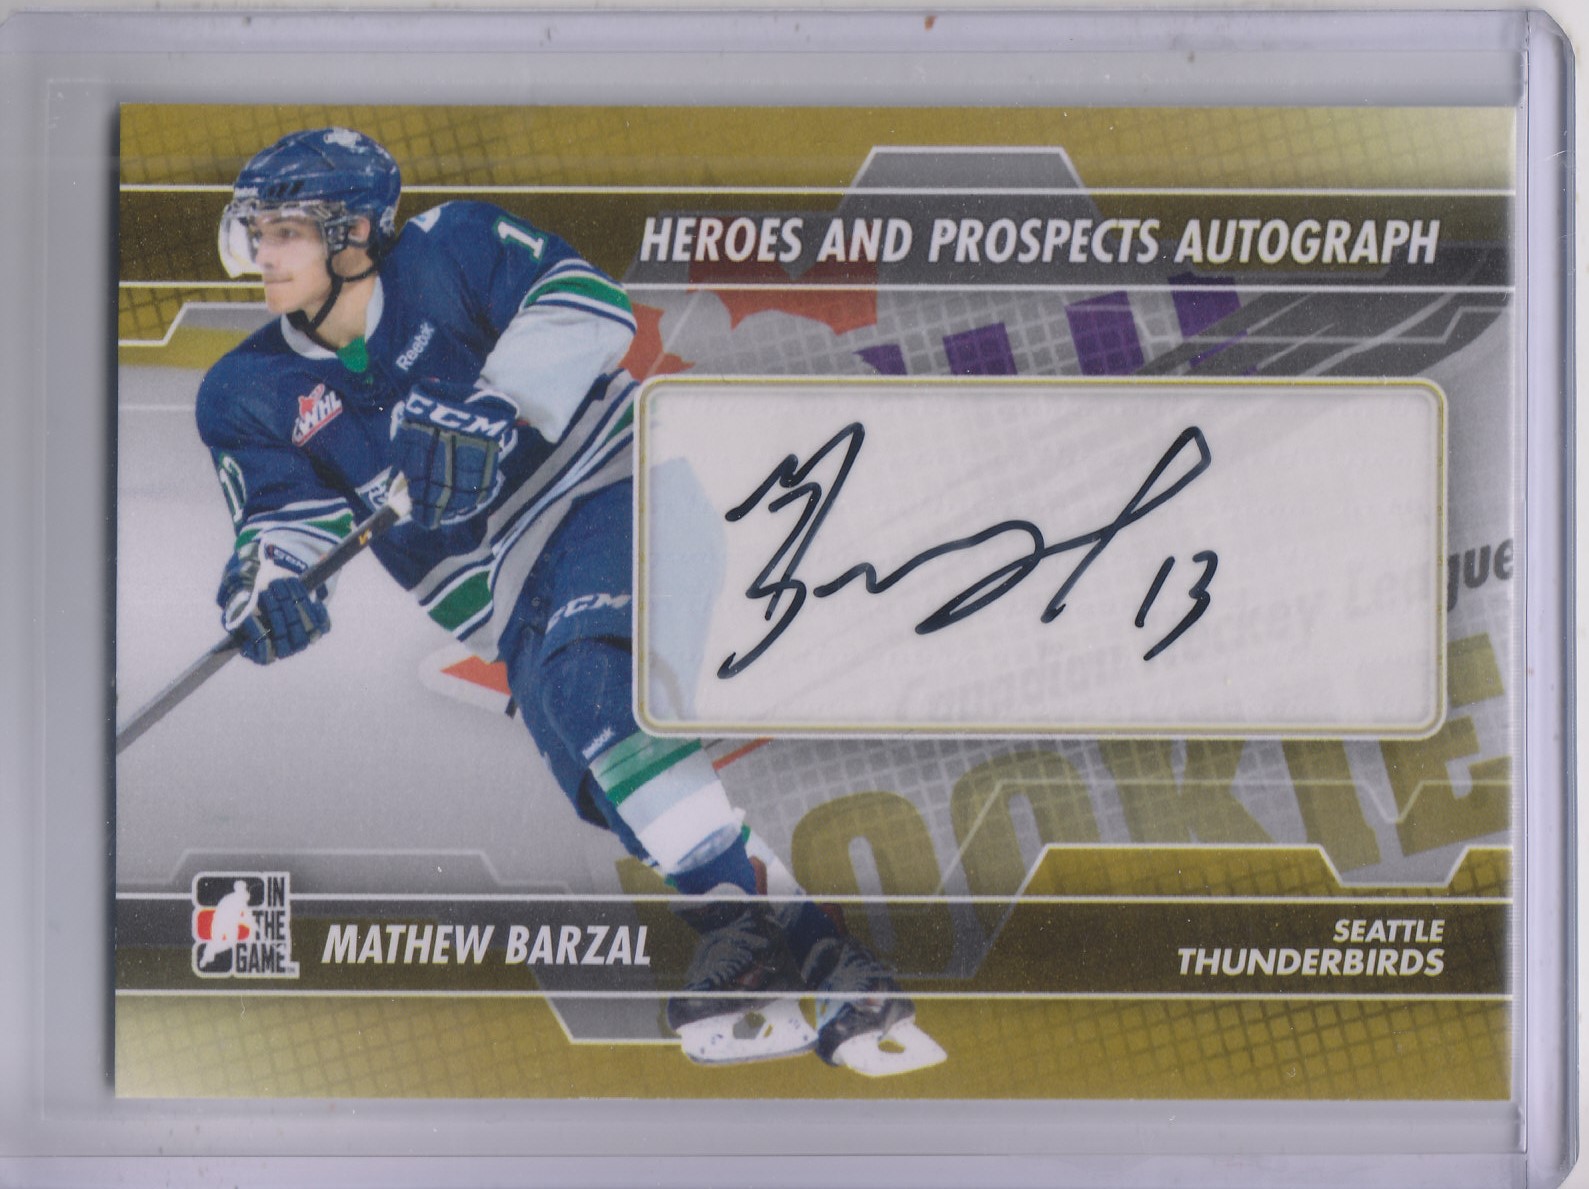 2013-14 ITG Heroes and Prospects Autographs #AMB Mathew Barzal